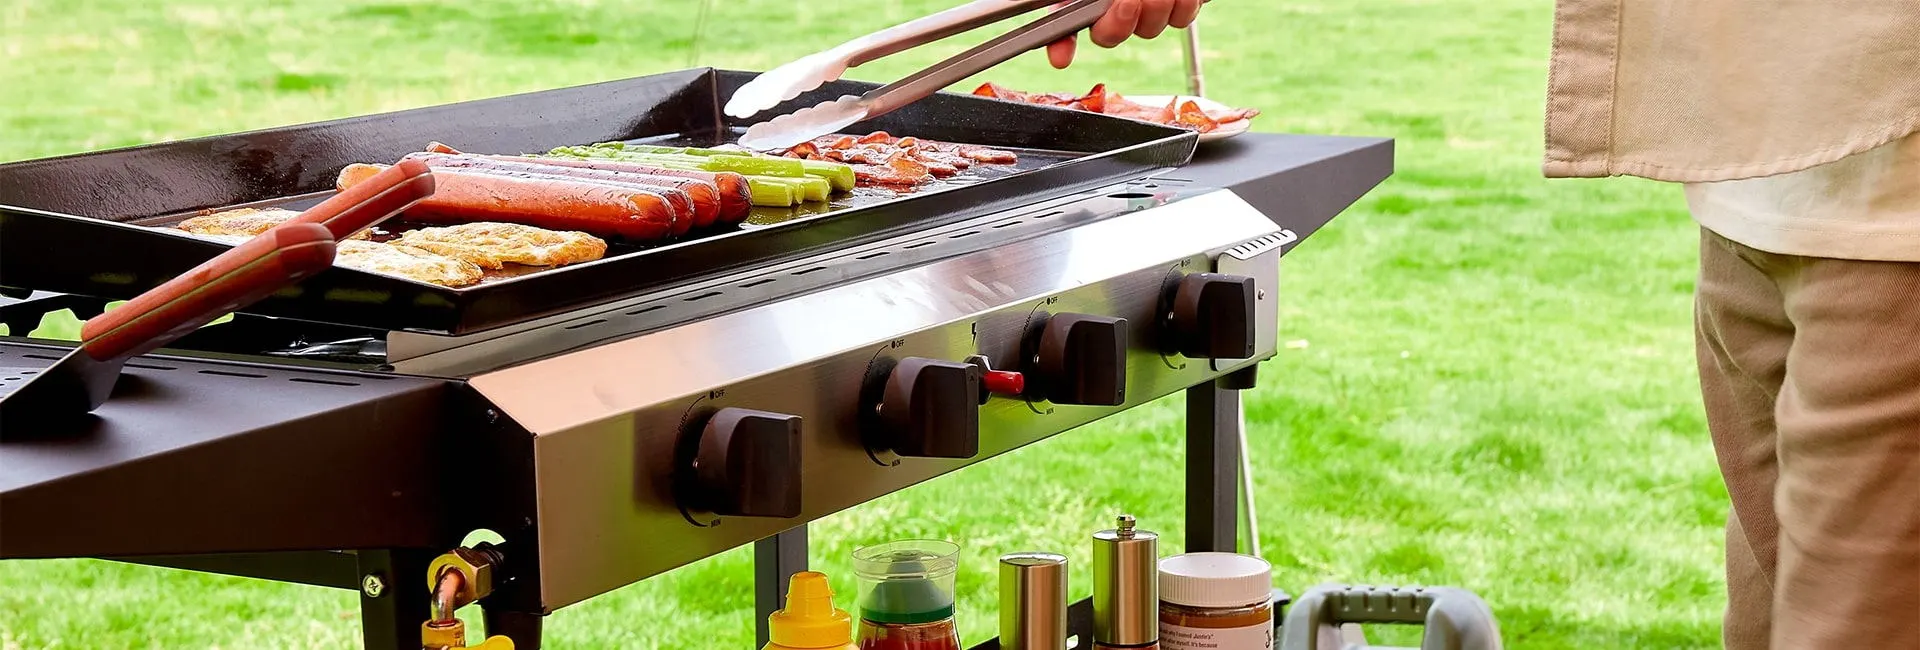 BBQ Grill Wholesale